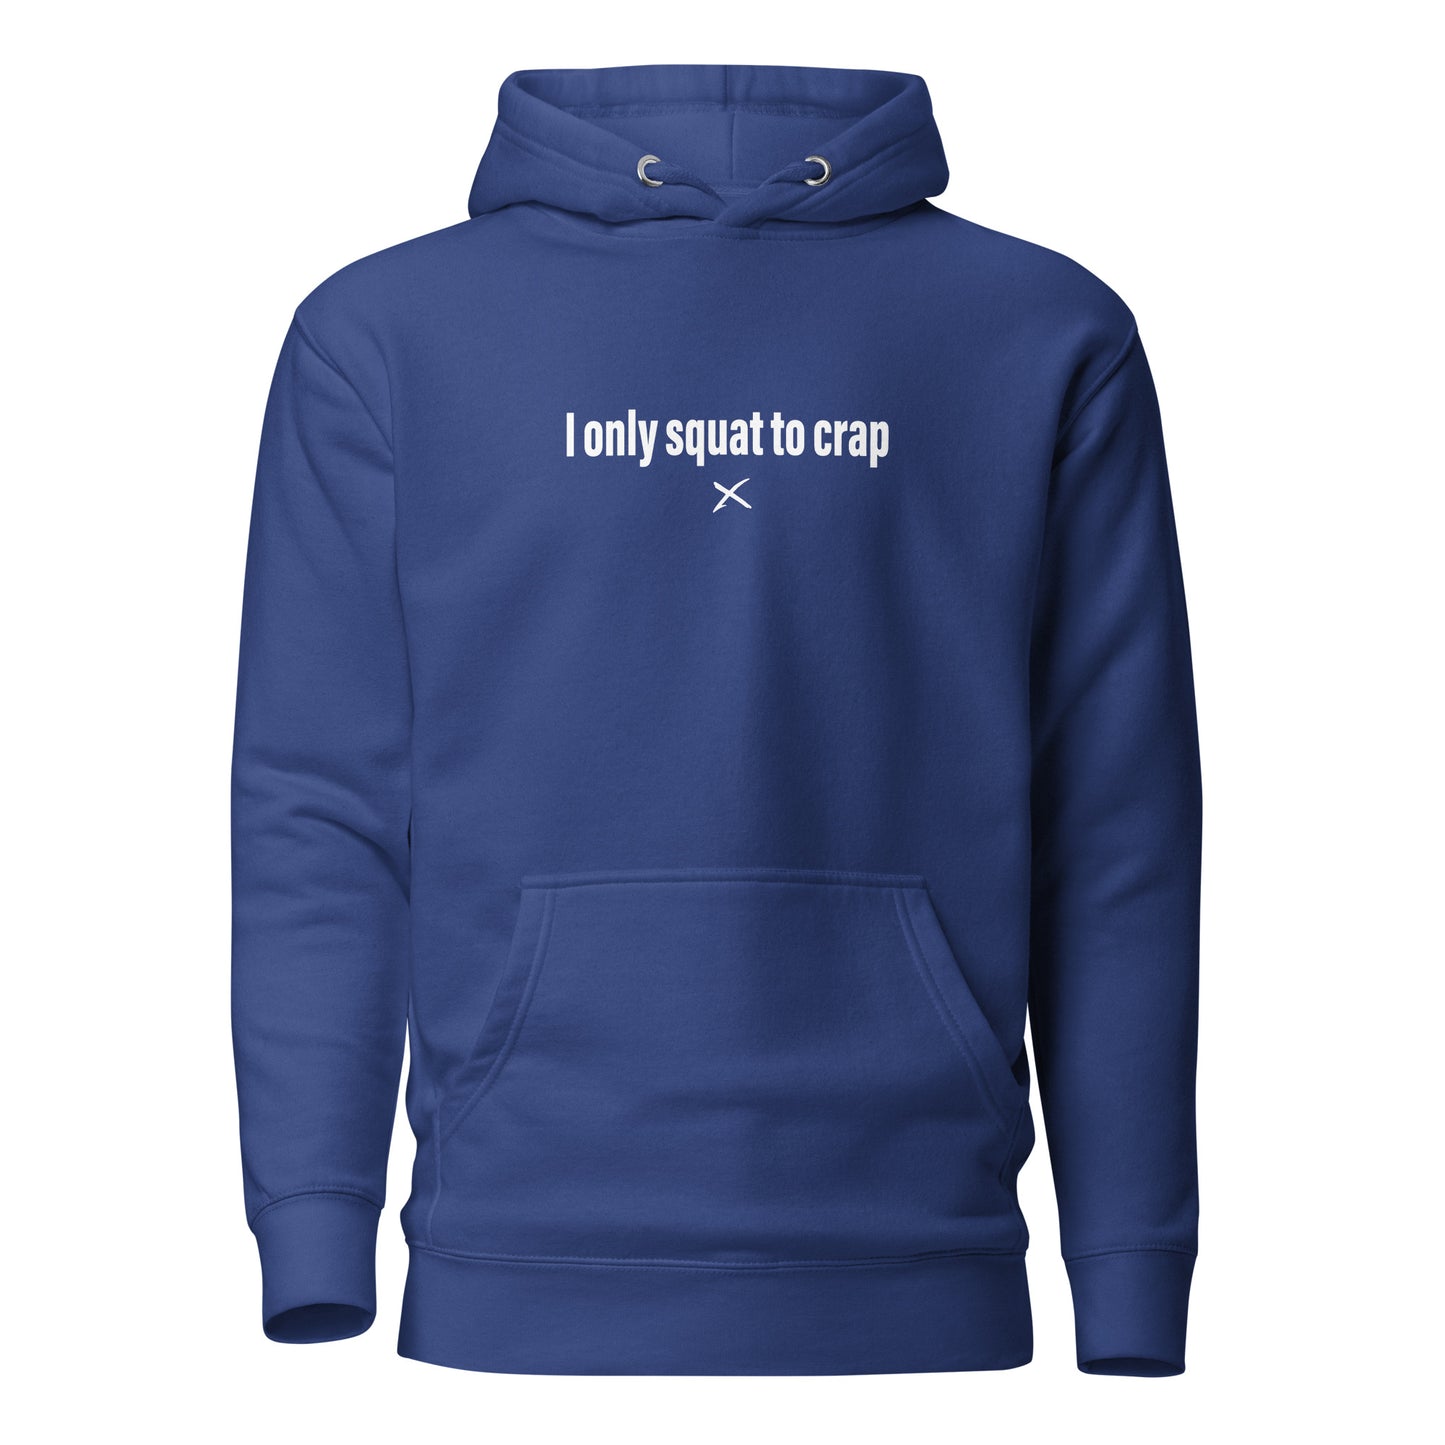 I only squat to crap - Hoodie